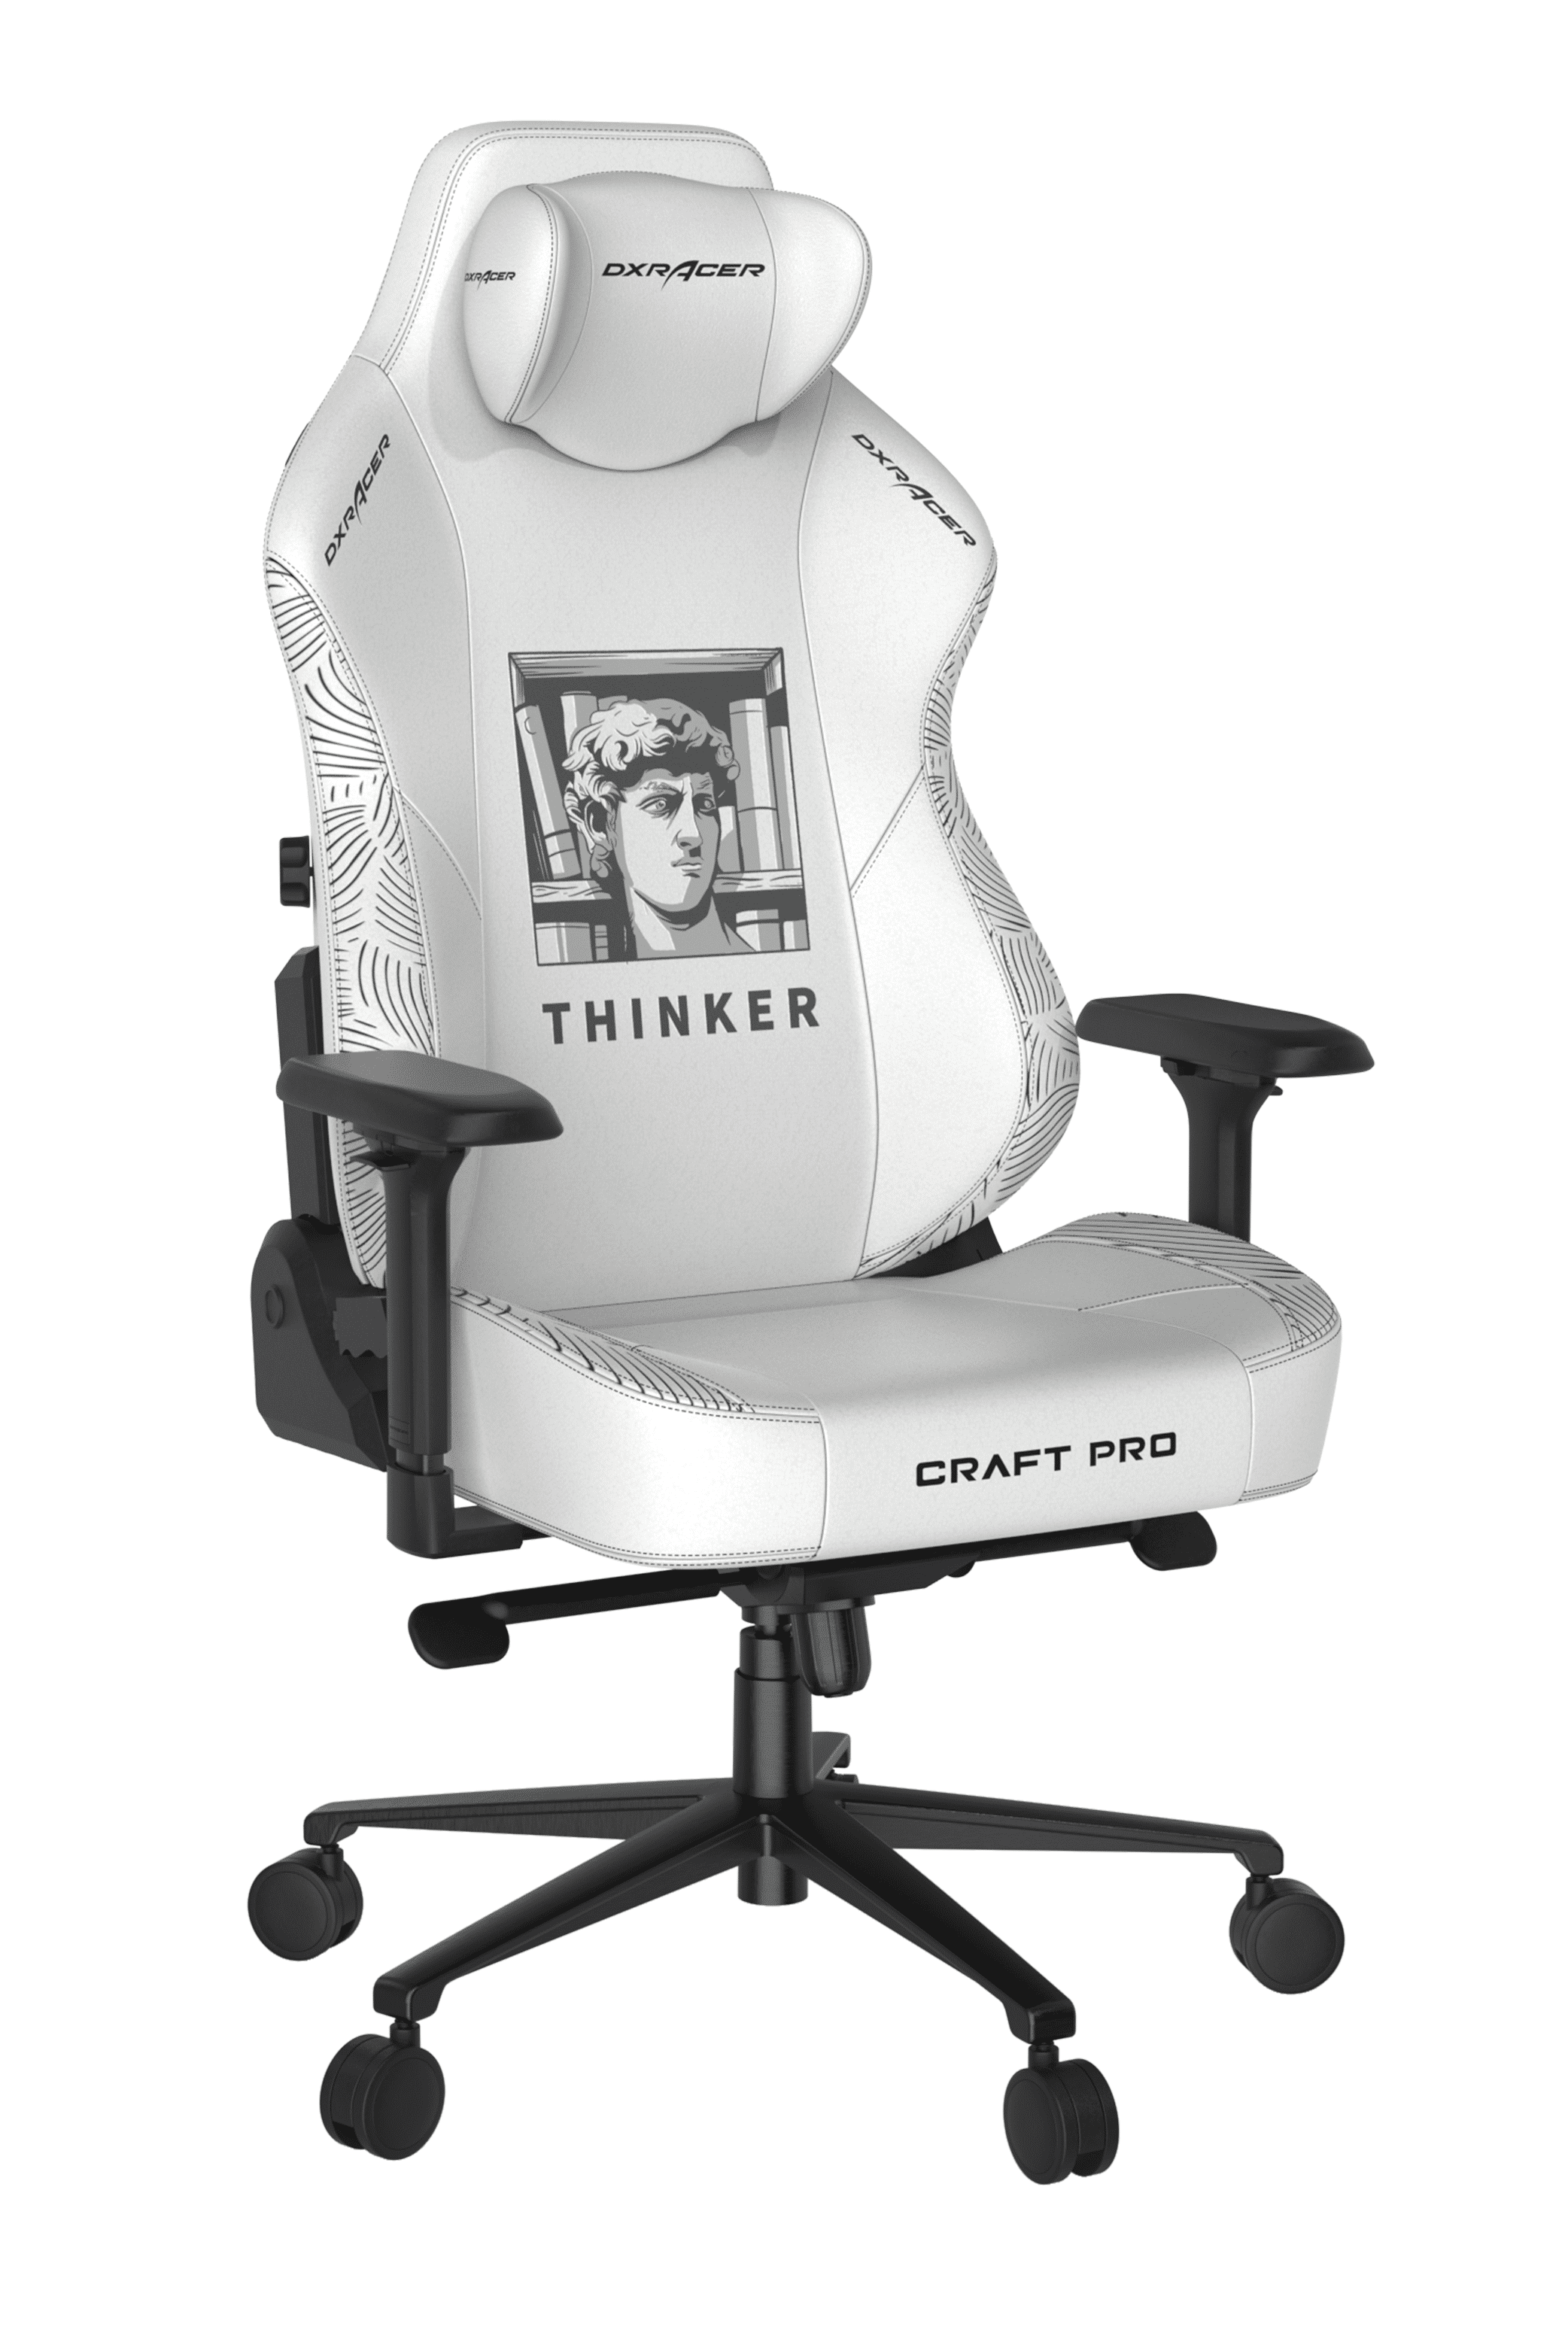 Armrest Built-in DXRacer Chair PC Black Chair Craft PU 4D Gaming Lumbar Leather Stealth- Pro Series- 275 lb Office